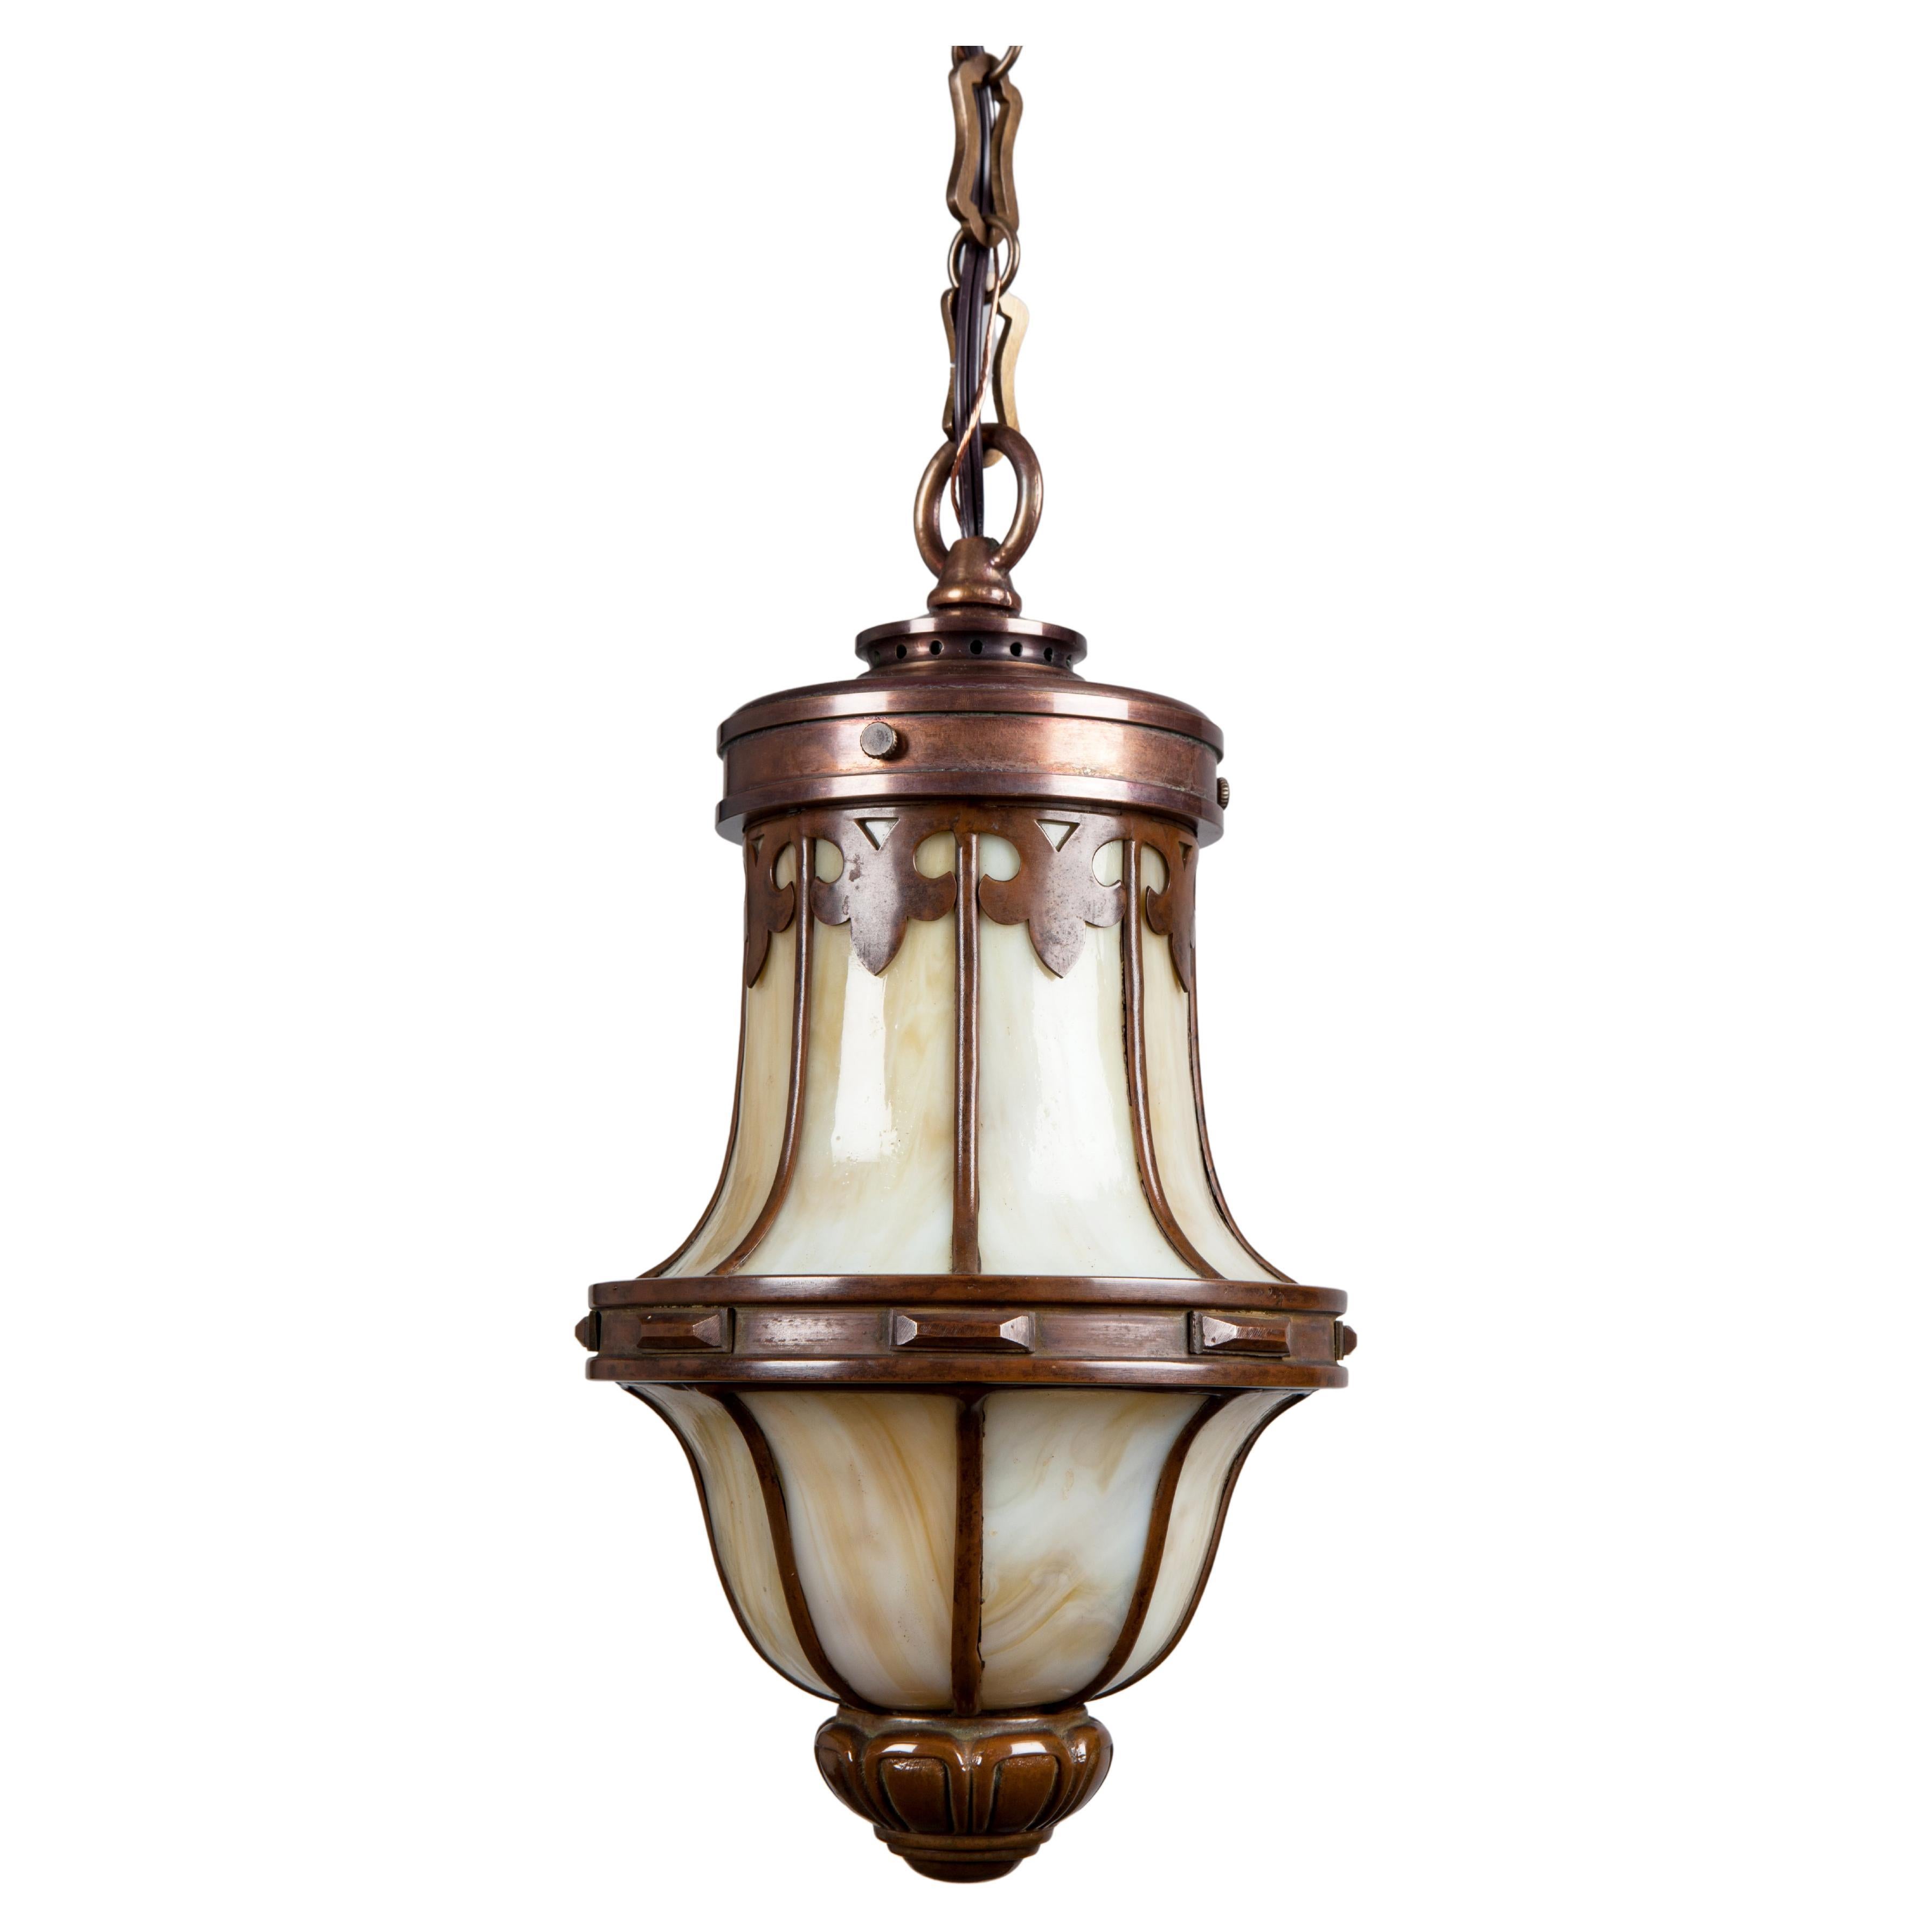 Copper and Bronze Arts and Crafts Lantern with Leaded Glass, Circa 1920 For Sale